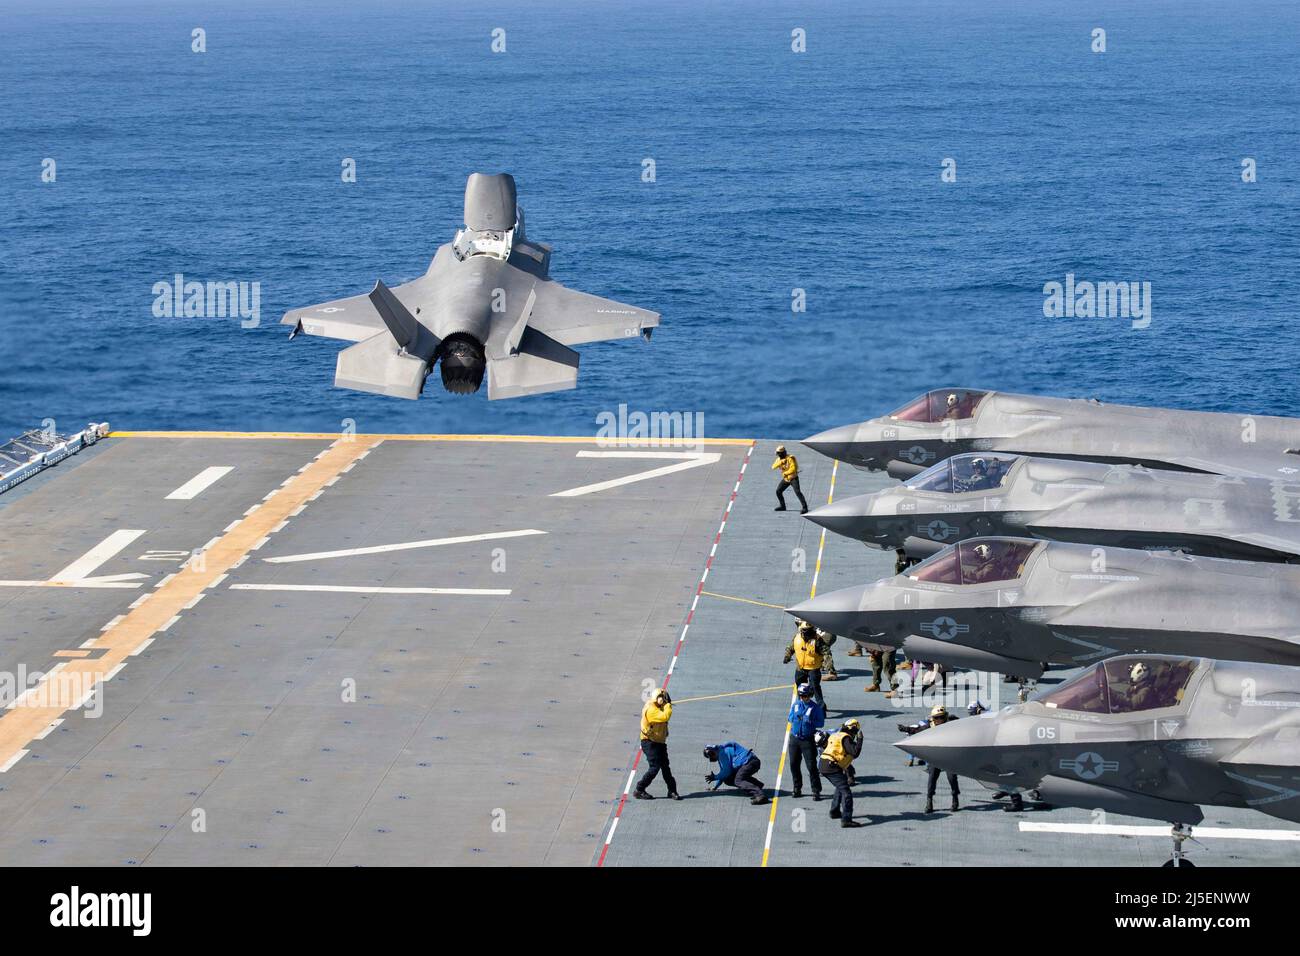 Pacific Ocean, United States. 08 April, 2022. A U.S. Marine Corps F-35B Lightning II aircraft attached to Marine Fighter Attack Squadron 122, launches from the flight deck of the Navy Wasp-class amphibious assault ship USS Tripoli during a routine deployment with the 3rd Fleet, April 8, 2021 off the coast of California, USA.  Credit: MC2 Theodore Quintana/U.S. Navy/Alamy Live News Stock Photo